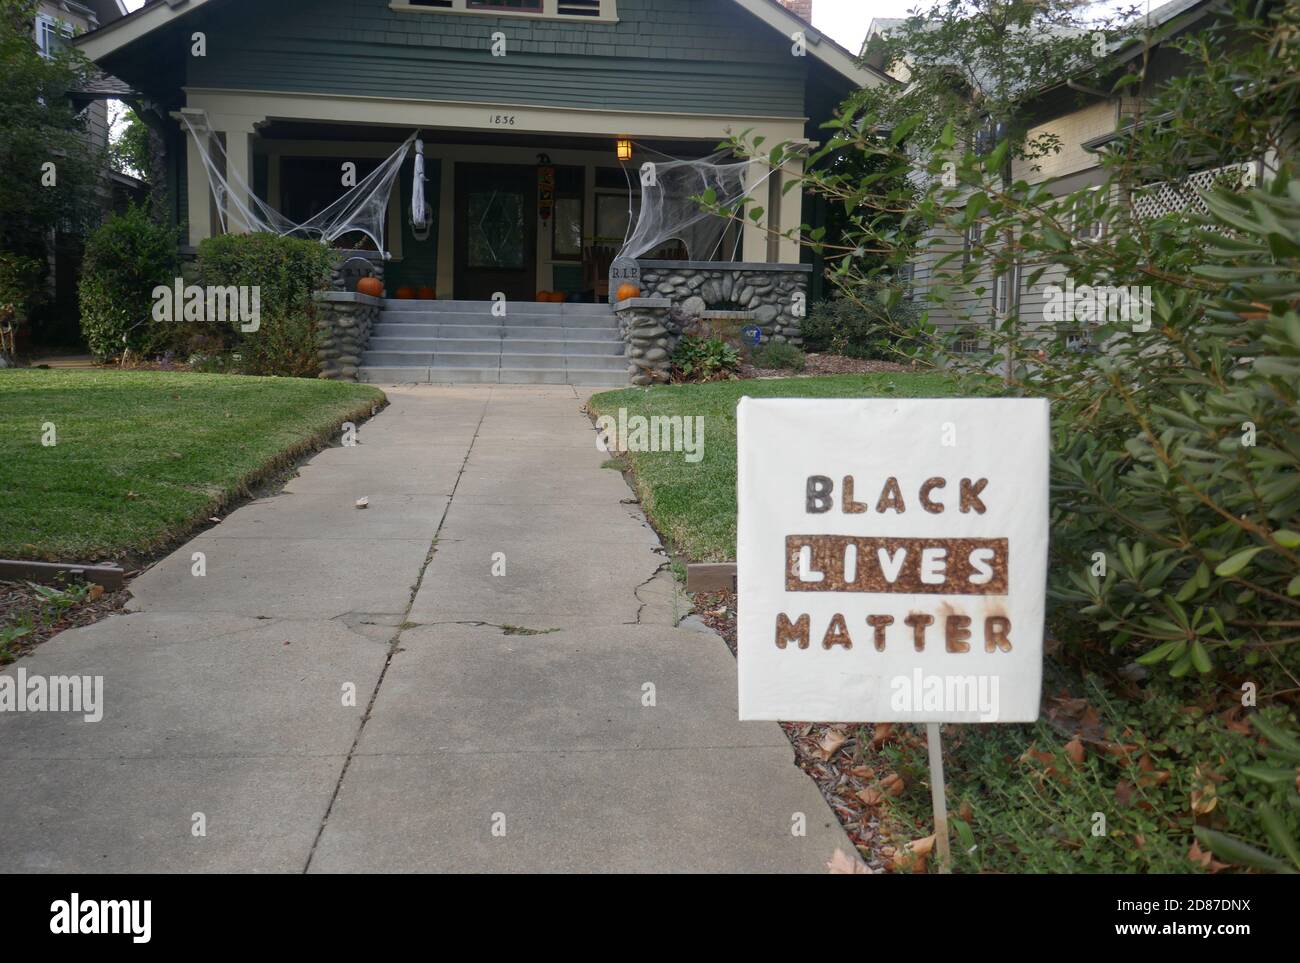 South Pasadena, California, USA 26th October 2020 A general view of atmosphere of Black Lives Matter Sign on October 26, 2020 in South Pasadena, California, USA. Photo by Barry King/Alamy Stock Photo Stock Photo